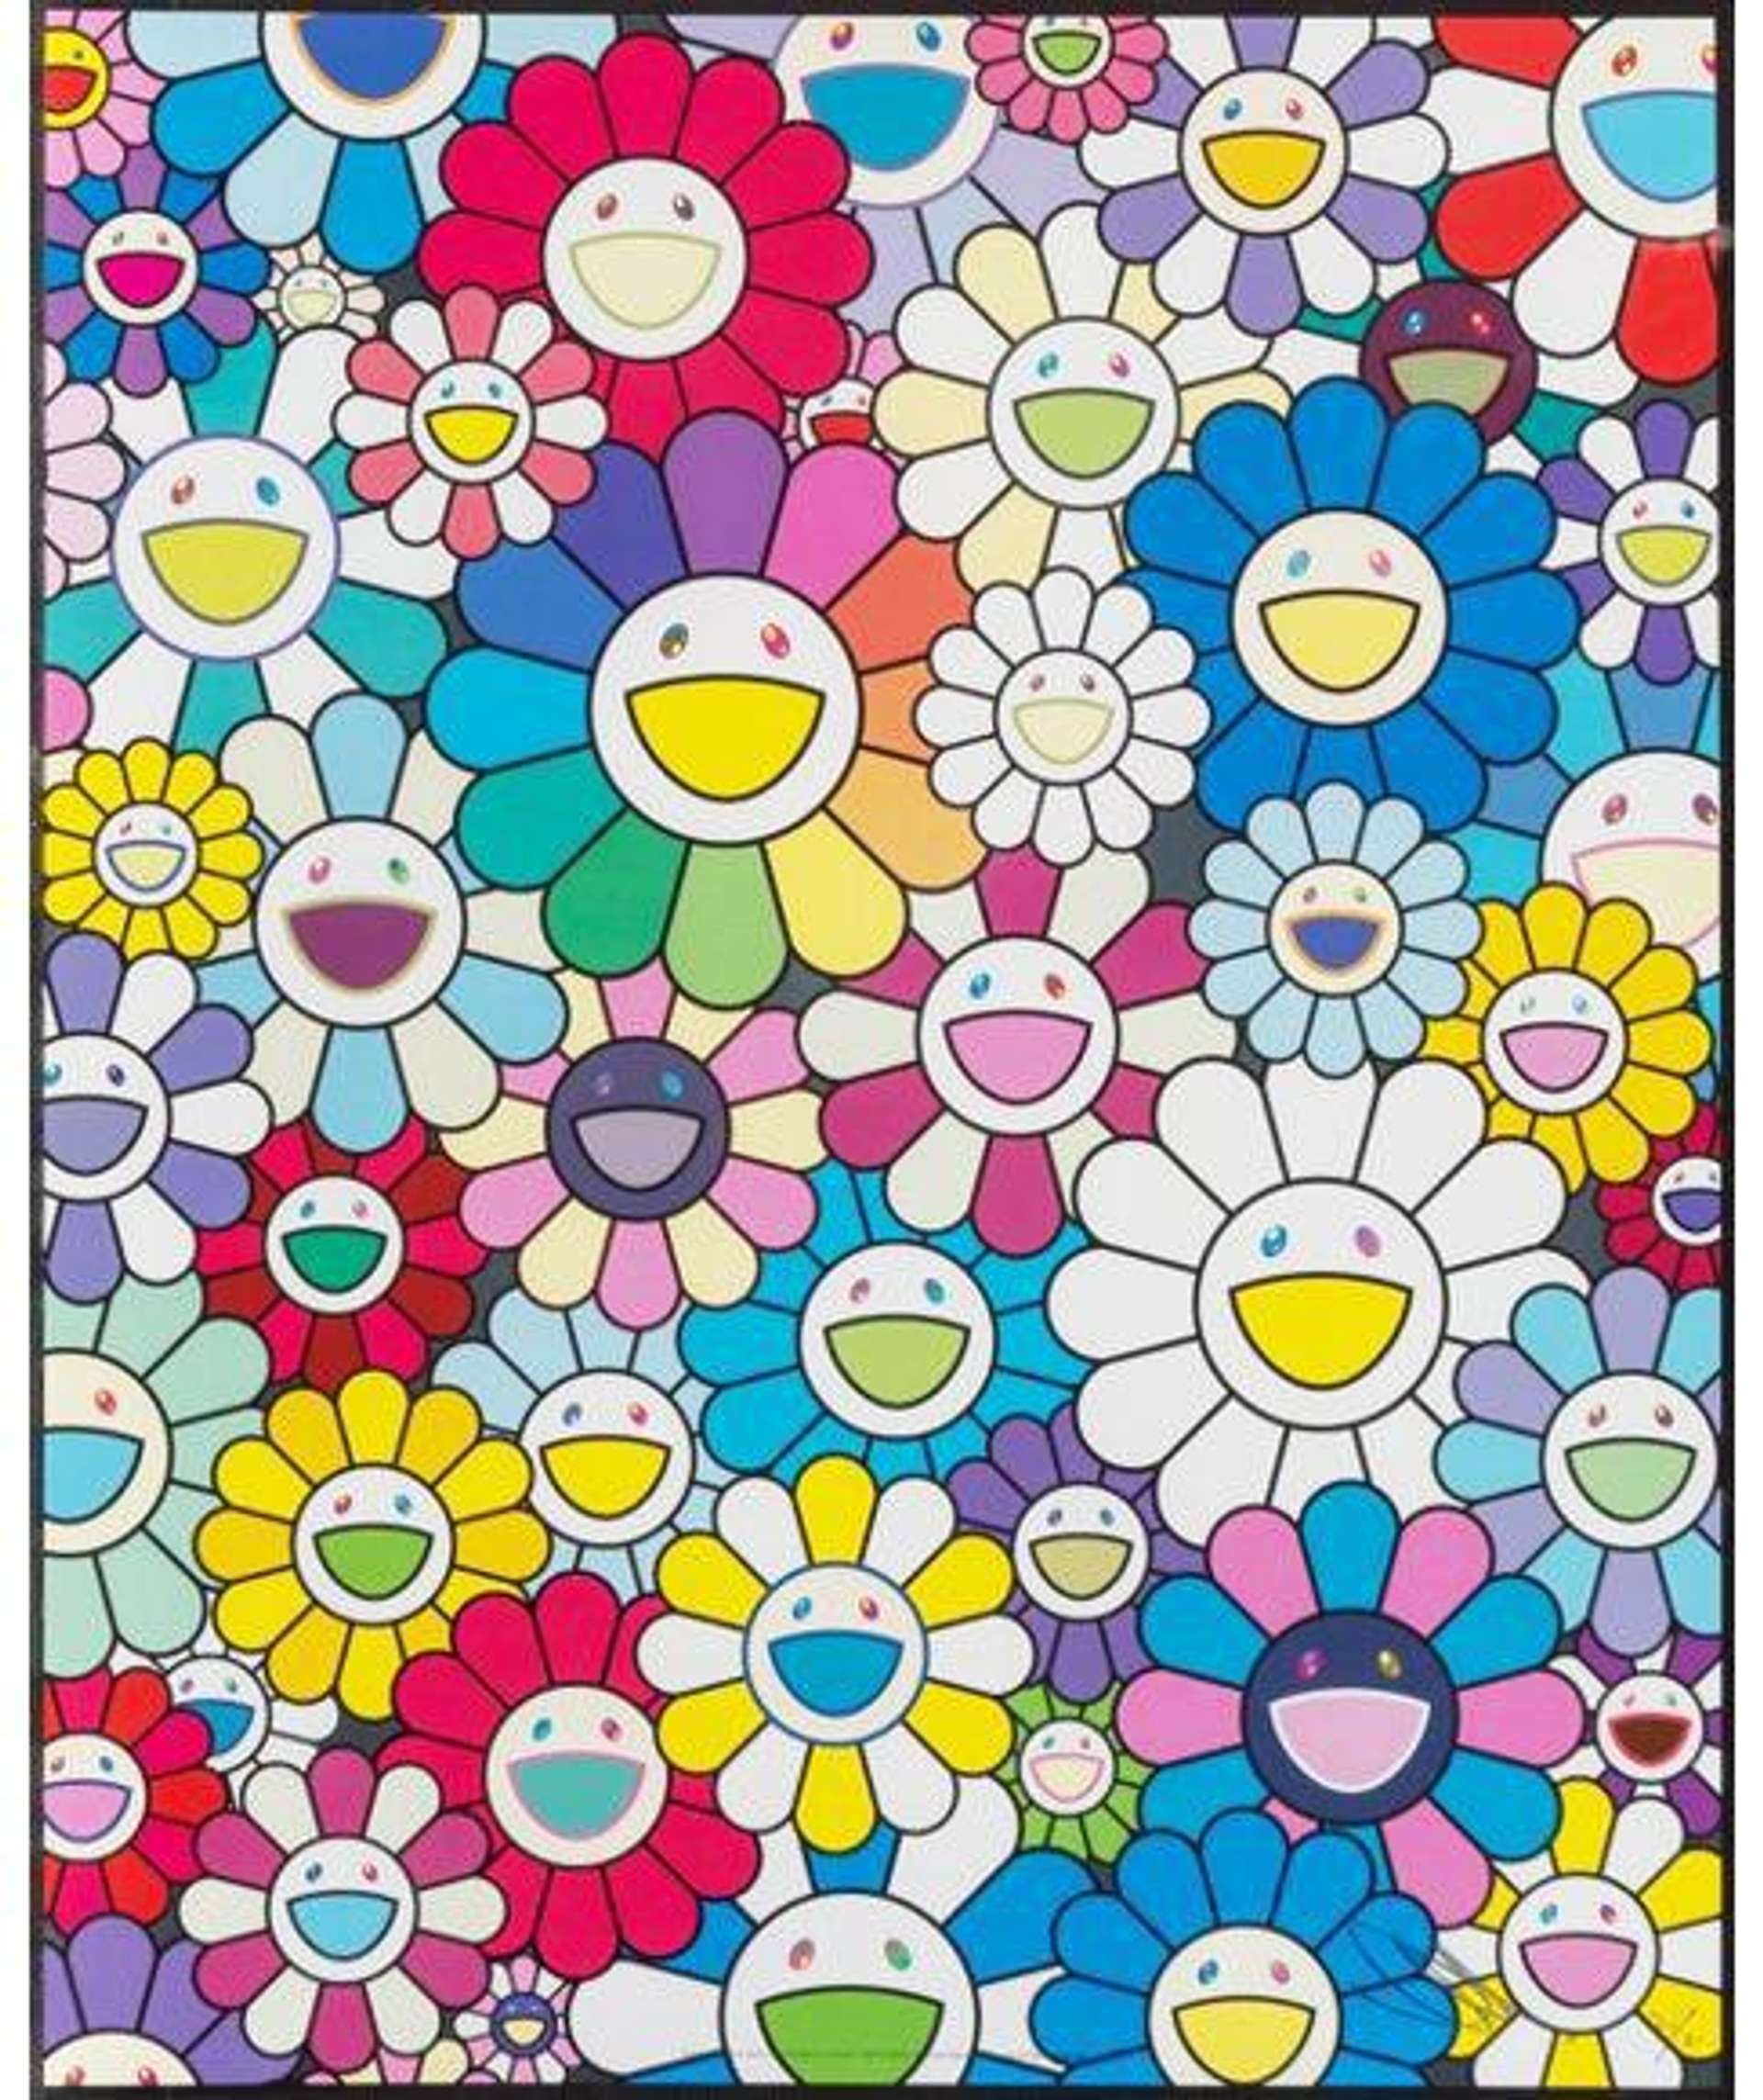 Field Of Flowers Seen From The Stairs To Heaven - Signed Print by Takashi Murakami 2018 - MyArtBroker